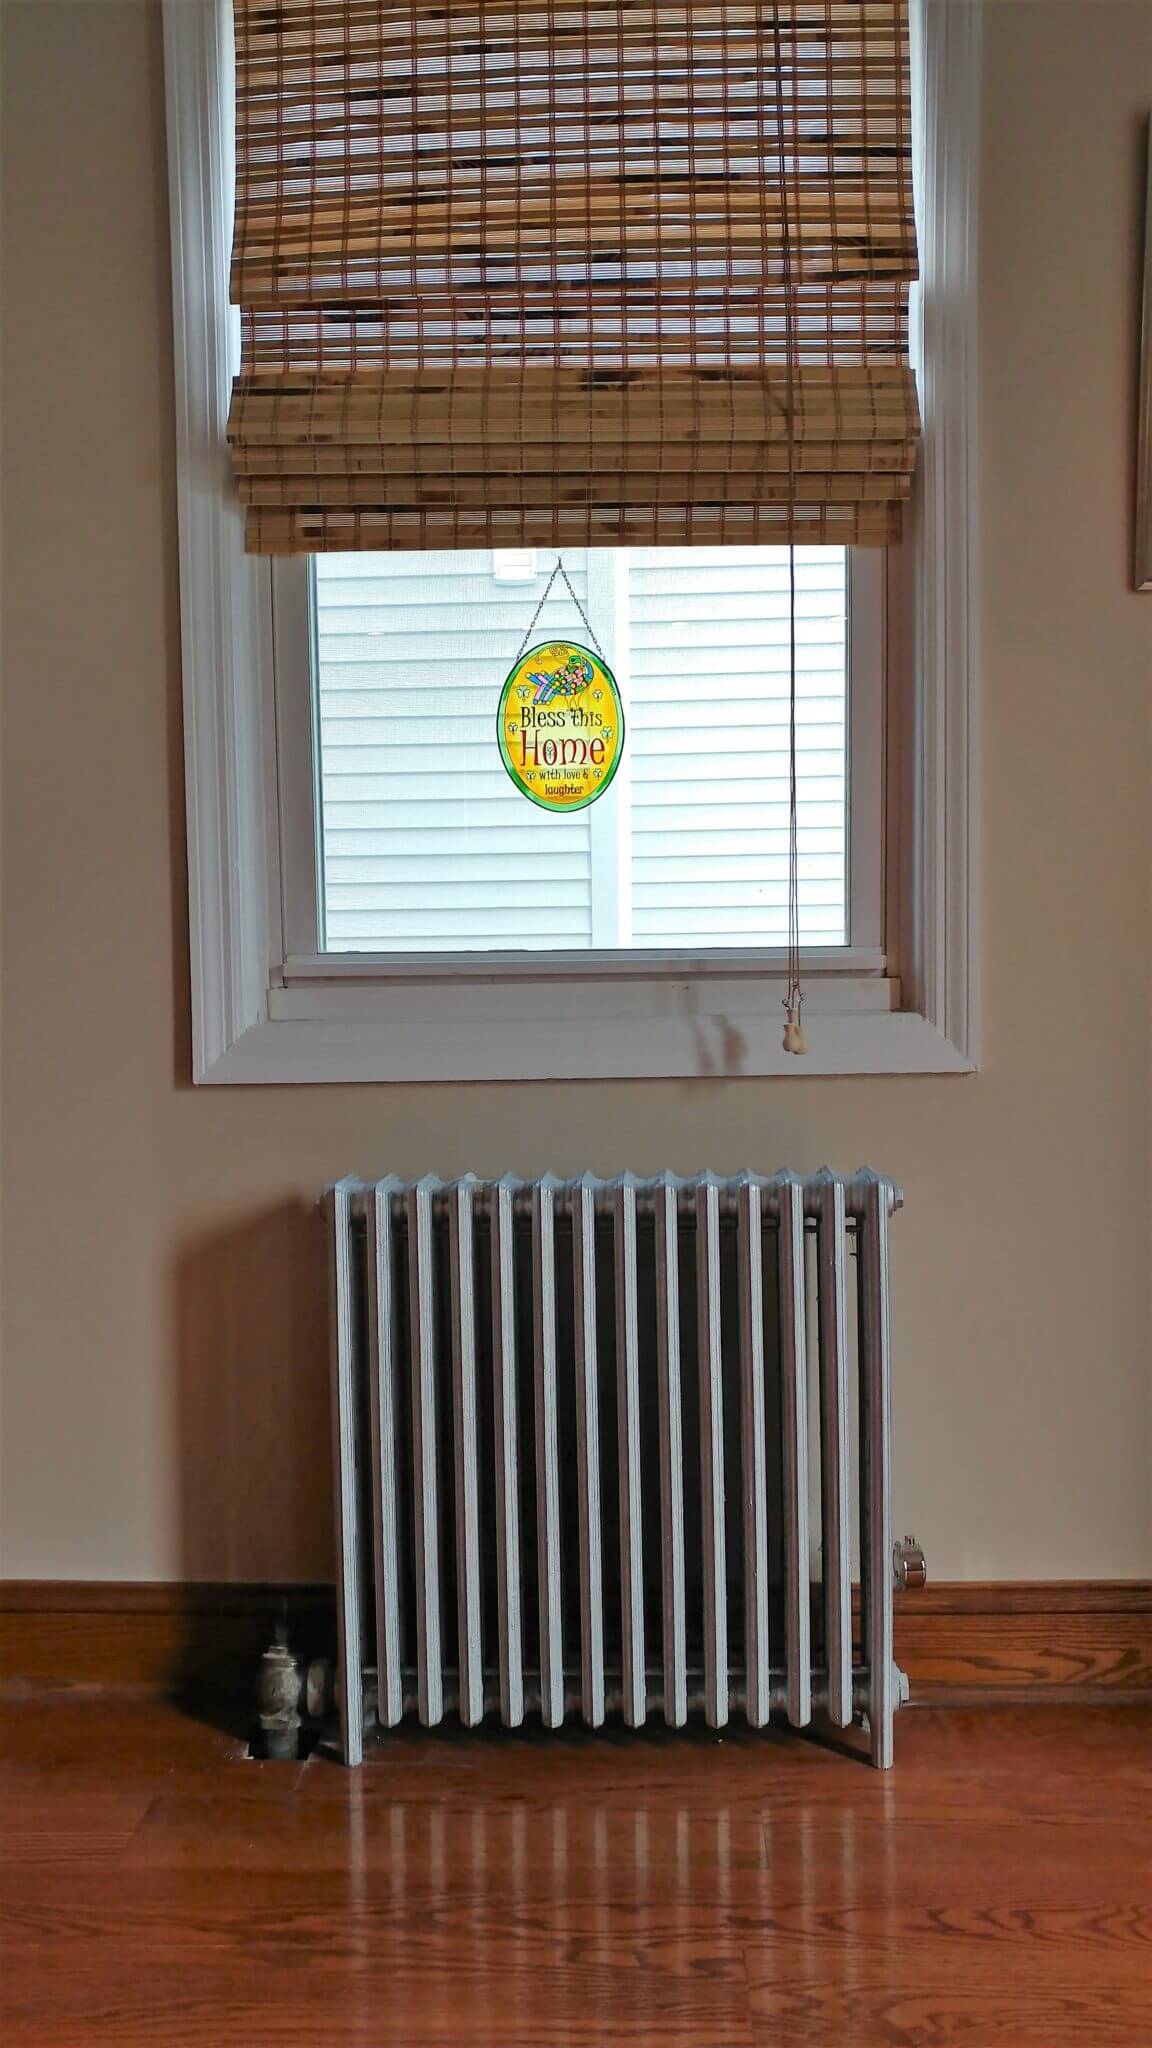 Cast Iron radiator without a radiator cover